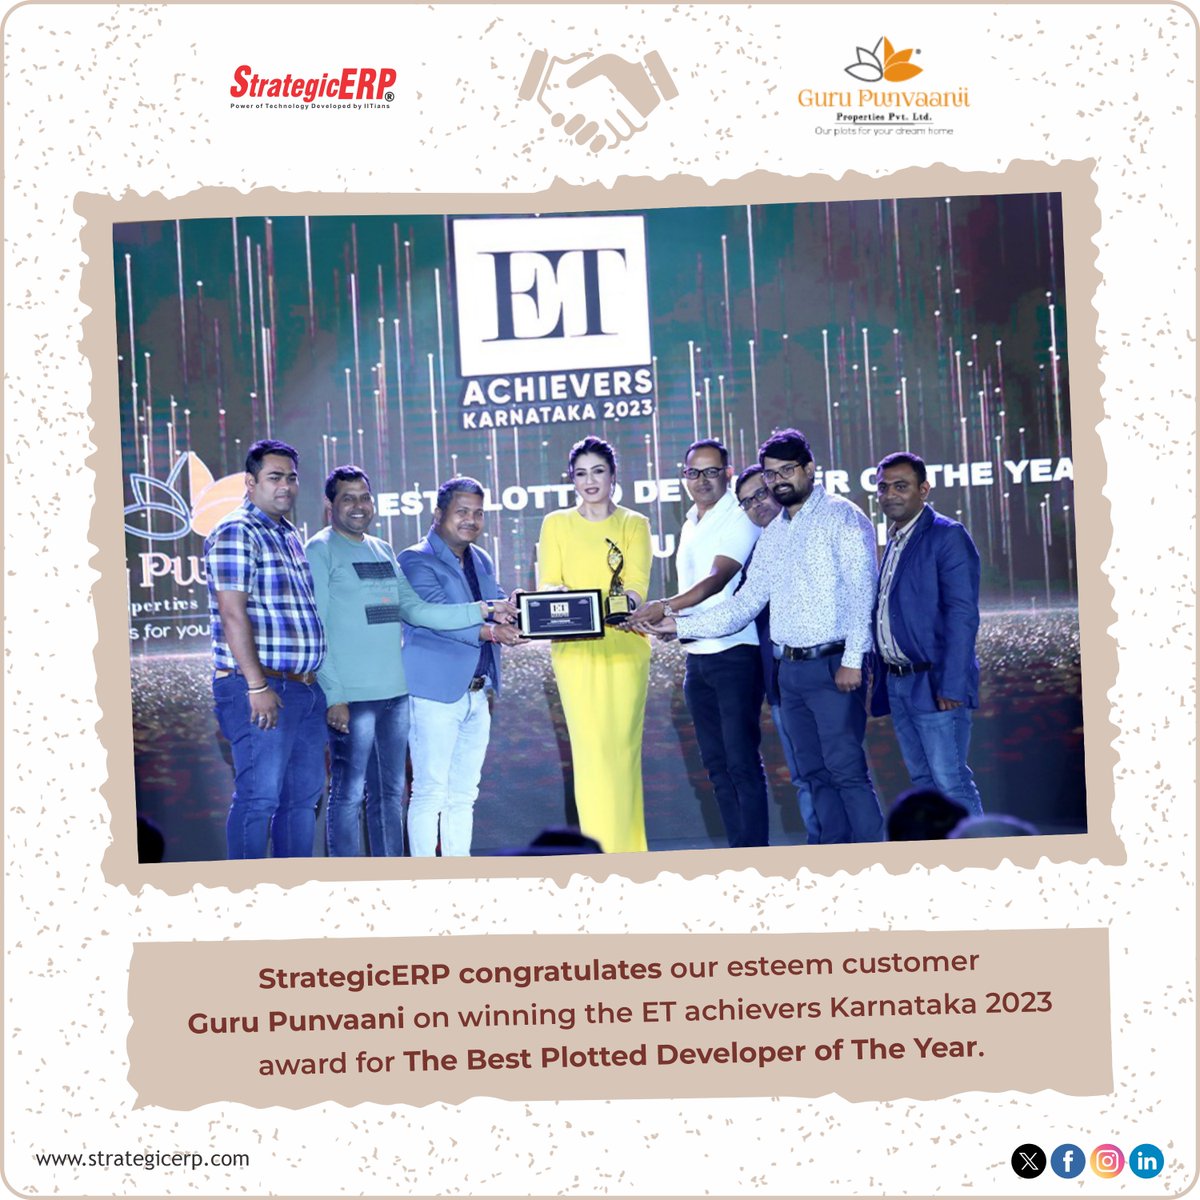 Our esteemed client Guru Punvaanii, has been awarded the Best Plotted Developer of The Year by ET achievers Karnataka 2023.
It always brings us great pleasure to see our partners prosper.

#GuruPunvaanii #Congratulations  #RealEstateERP  #DigitalTransformation #ERPtechnology